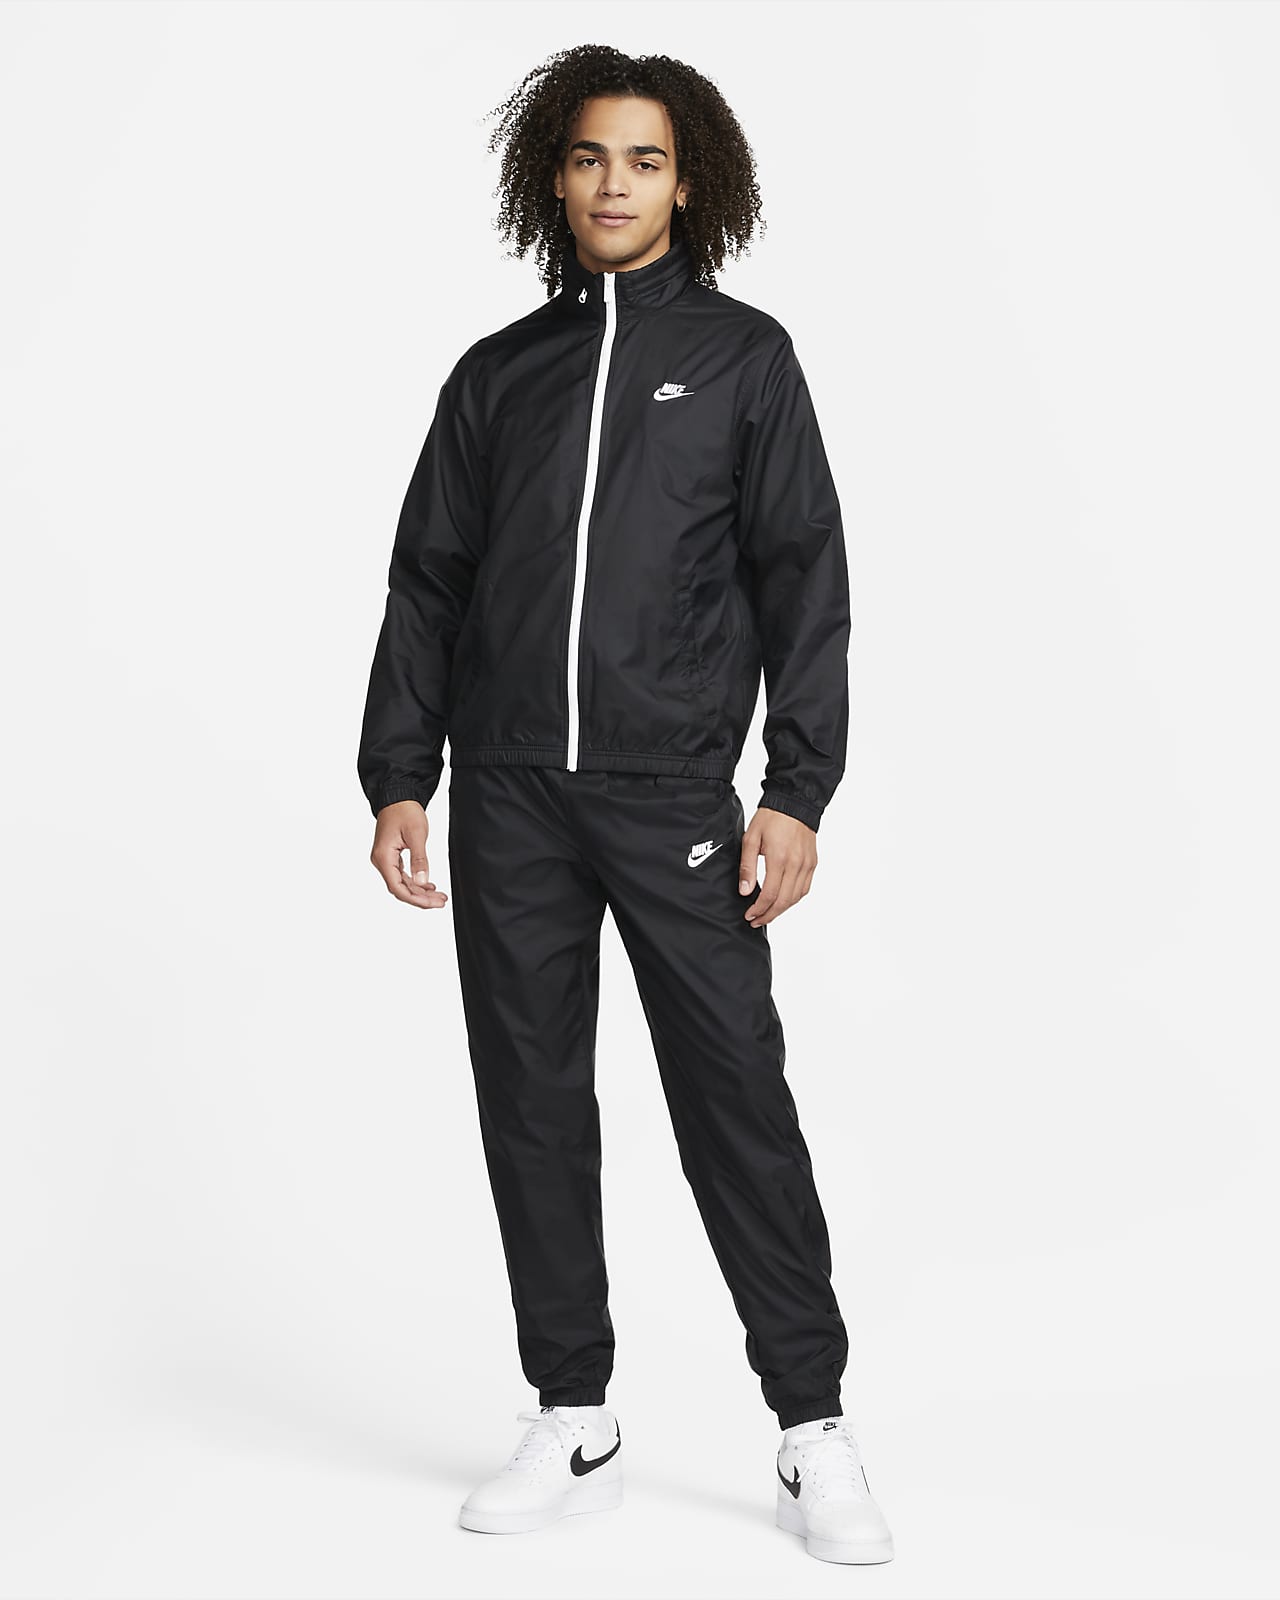 https://static.nike.com/a/images/t_PDP_1280_v1/f_auto,q_auto:eco/7d0fd1bf-9994-4ad4-abe0-efd4c6f7c5b0/sportswear-club-lined-woven-tracksuit-2Wl2rc.png